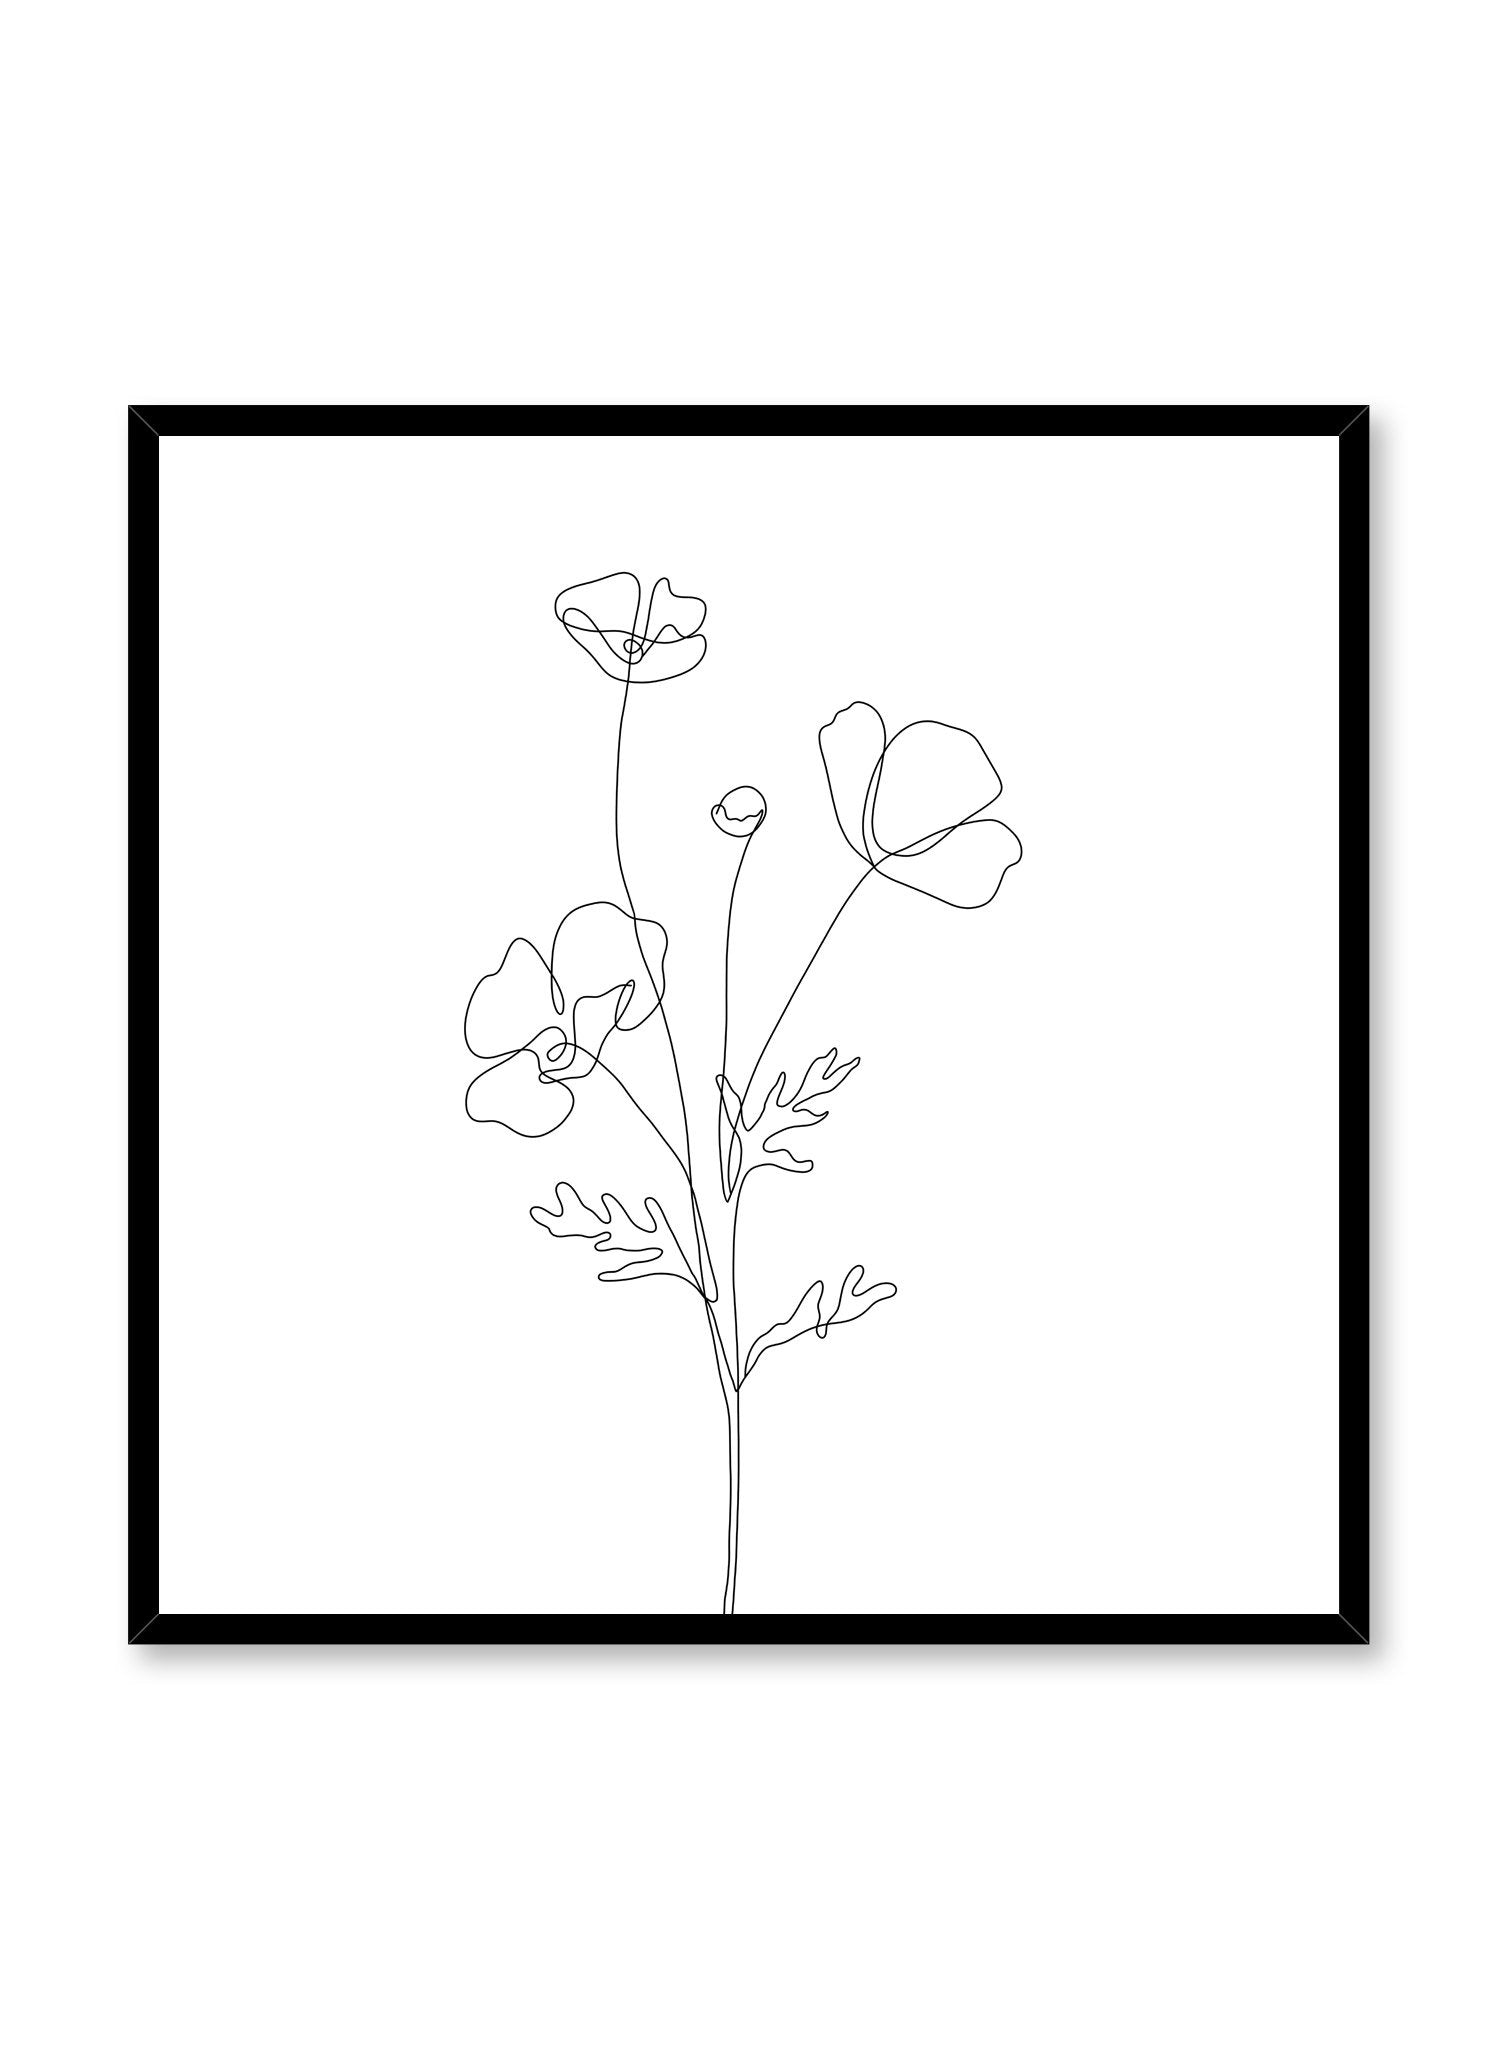 Minimalist design poster by Opposite Wall with line art drawing of poppy in square format